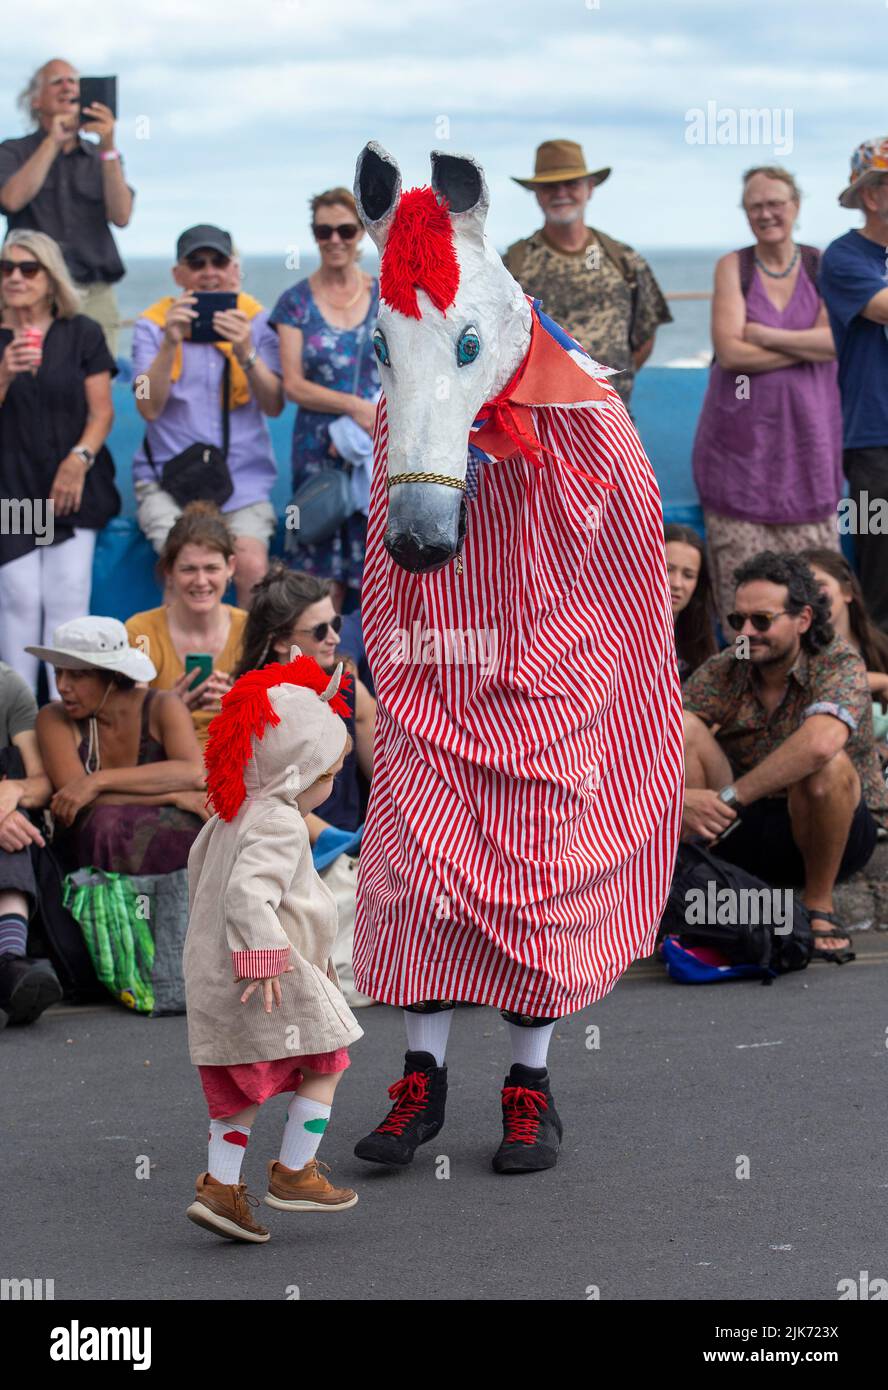 Sidmouth, UK. 31st July 2022 Horsing around: Sidmouth Horse Trials, an event for Hobby Horses and 'Beasts' held as part of the annual Folk Festival, back in full swing after the recent Covid years. Tony Charnock/Alamy Live News Stock Photo